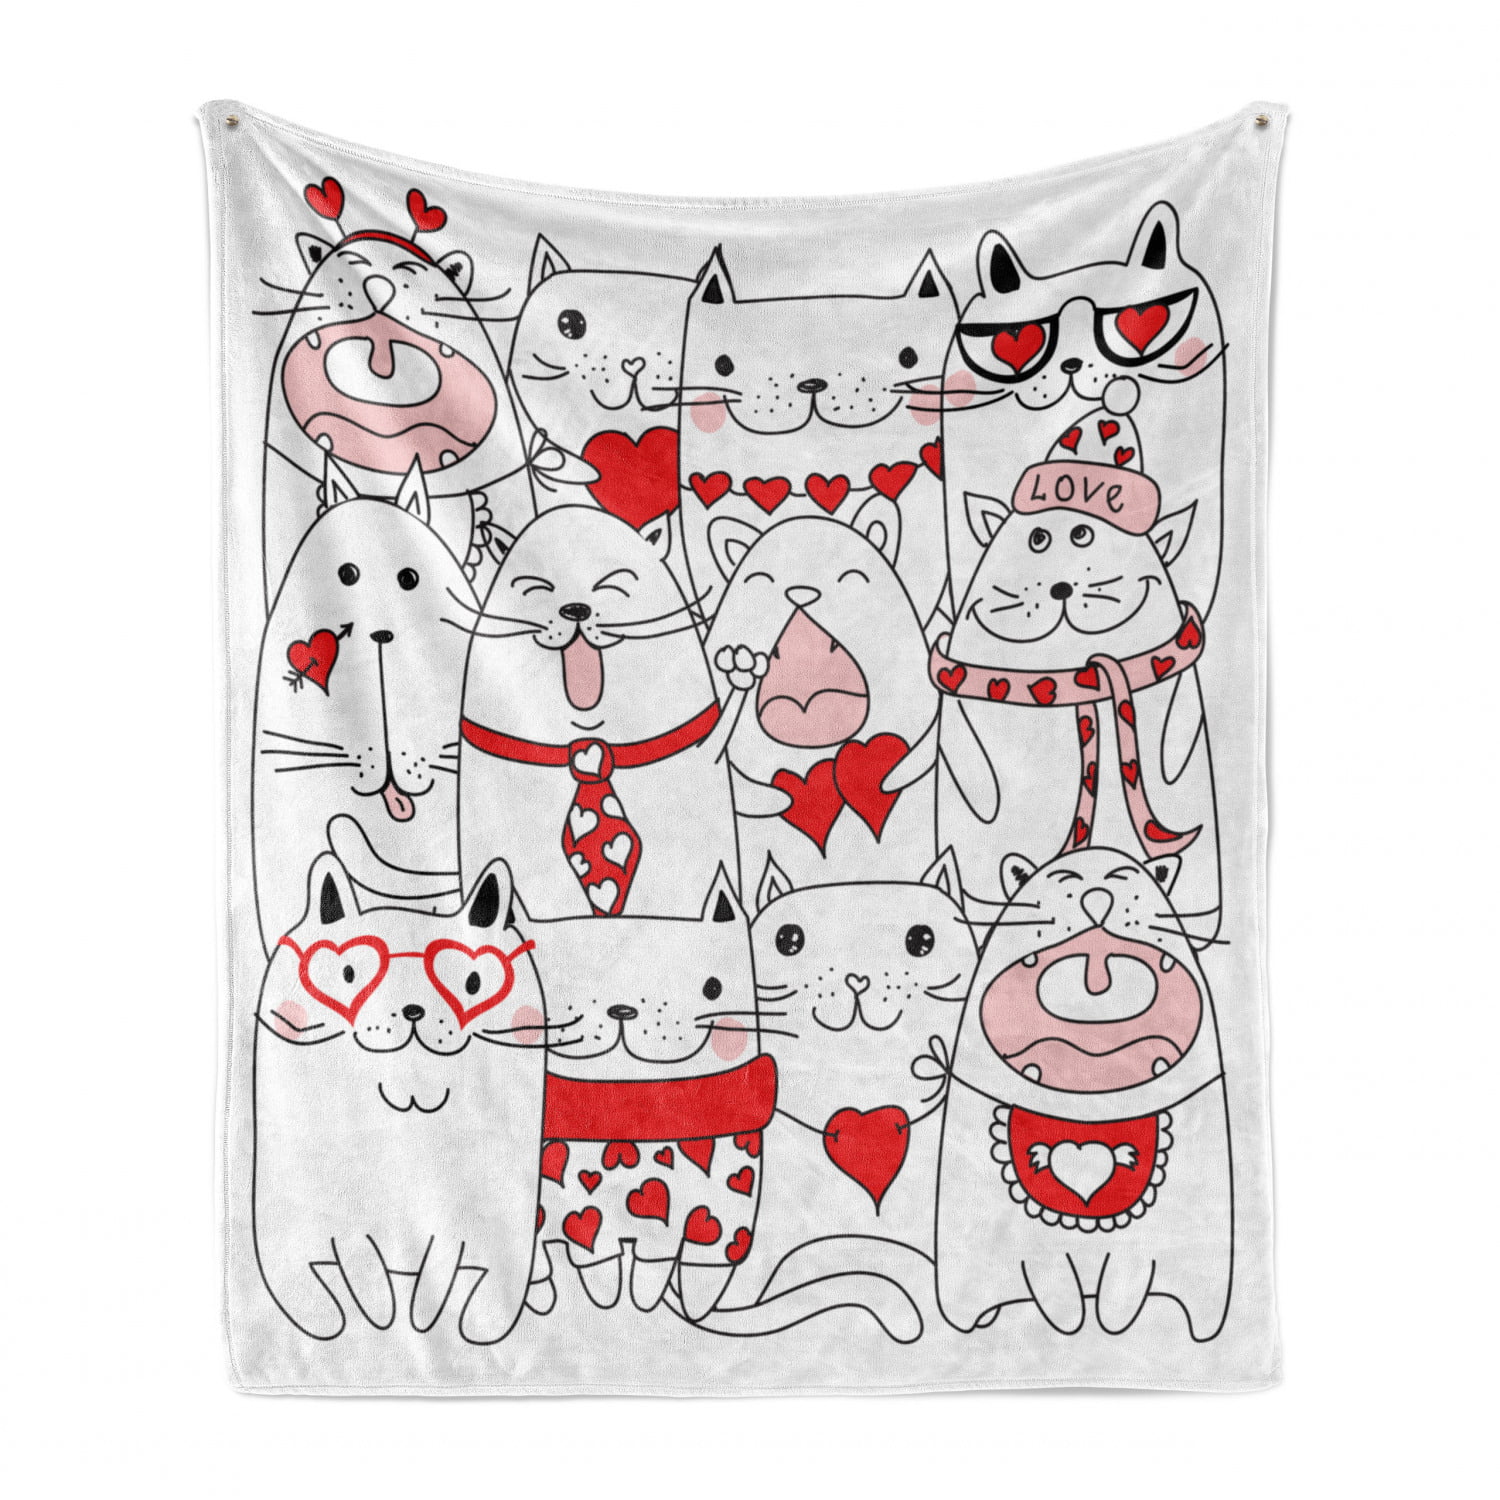 60 x 80 Cozy Plush for Indoor and Outdoor Use I Love Animals Dogs and Cats Themed Classic Graphic with Heart Charcoal Grey and Vermilion Ambesonne Paw Print Soft Flannel Fleece Throw Blanket 